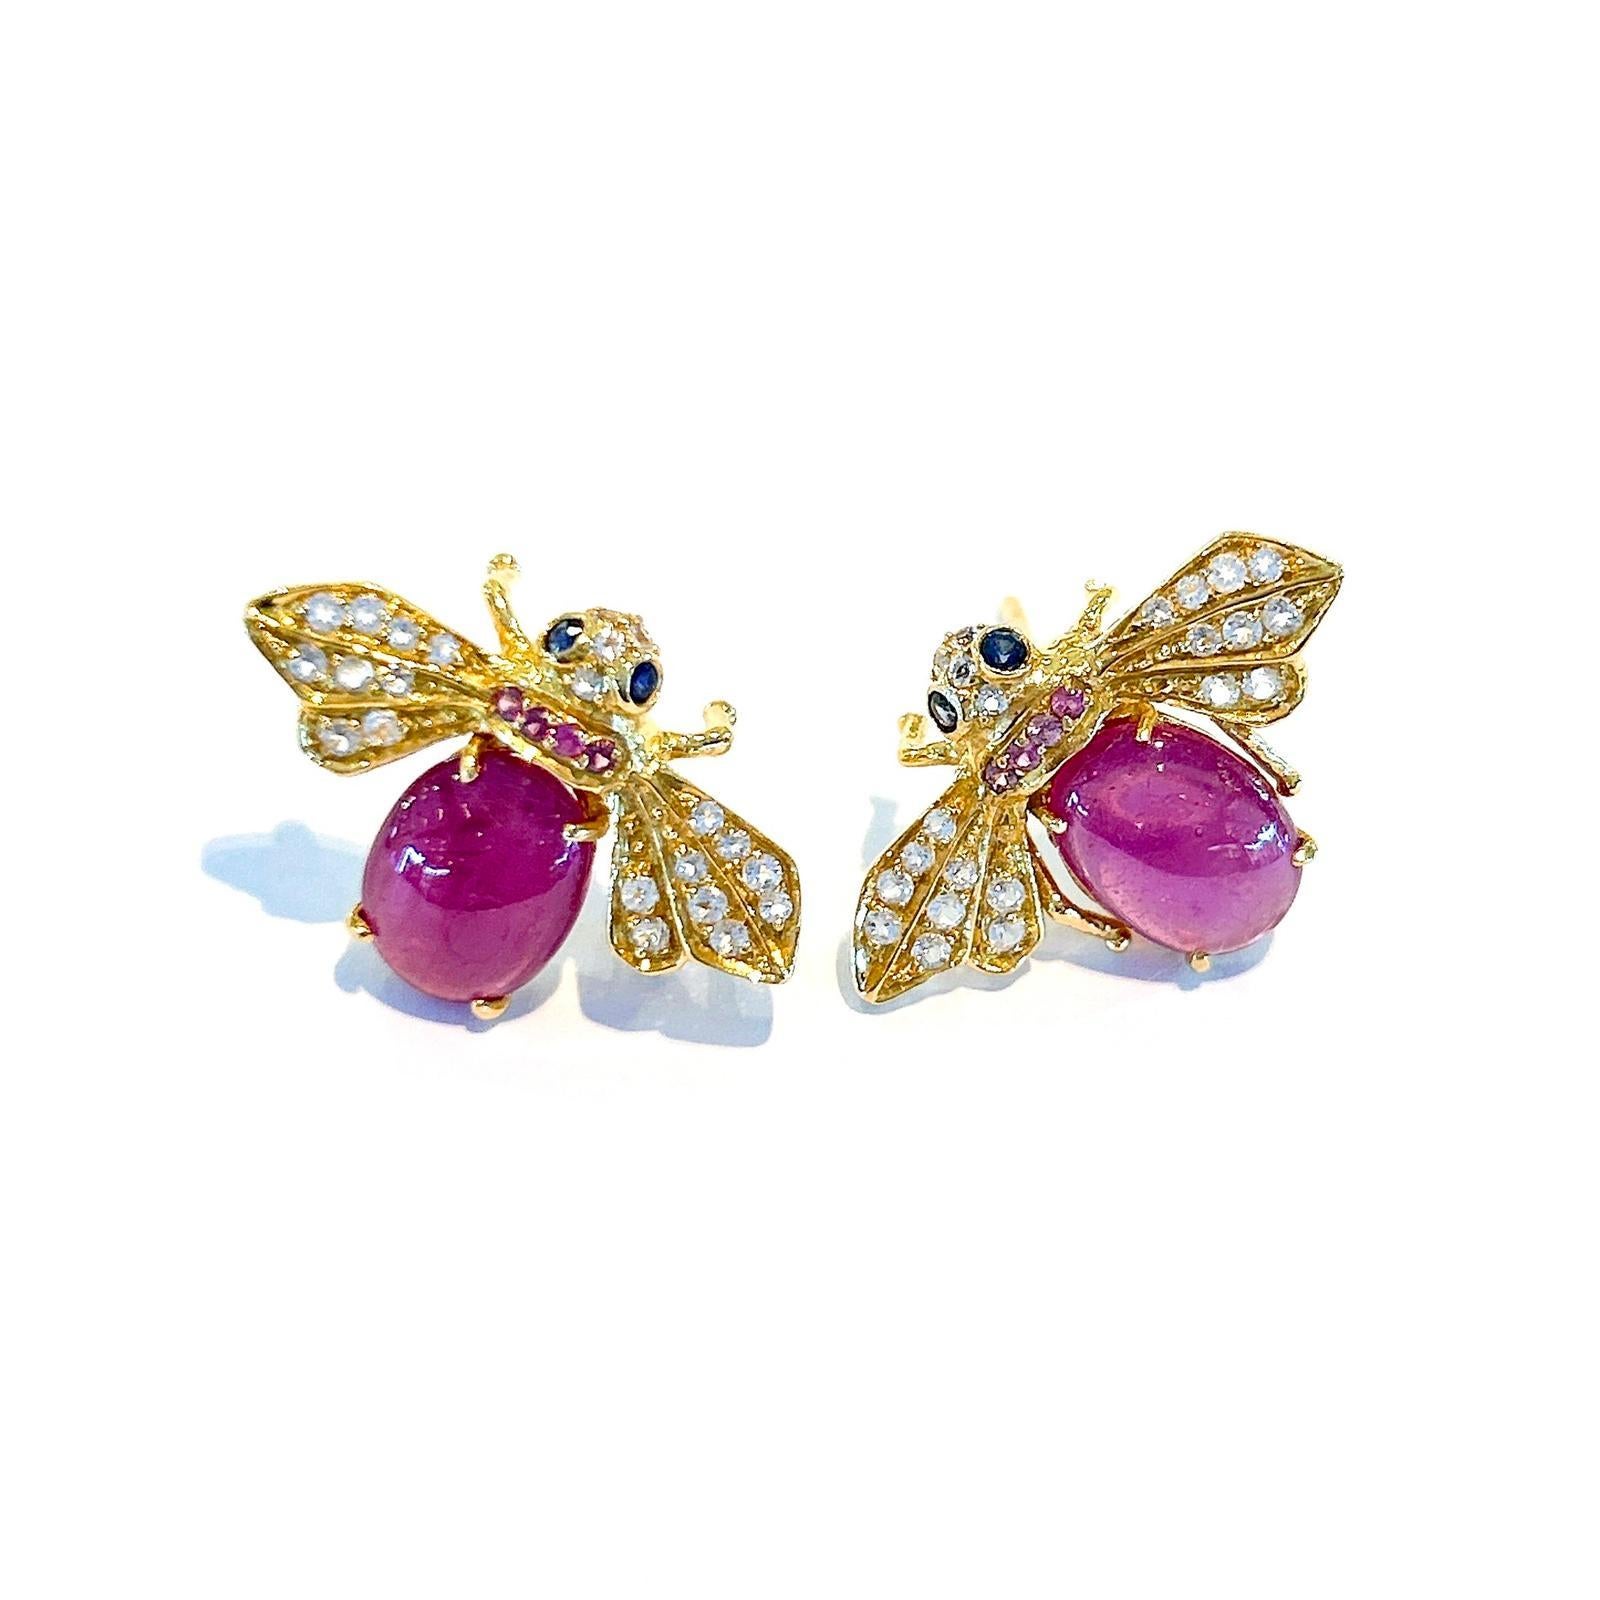 Belle Époque Bochic “Orient” Ruby Earrings with White Topaz & Blue Sapphire Set in 22k Gold For Sale